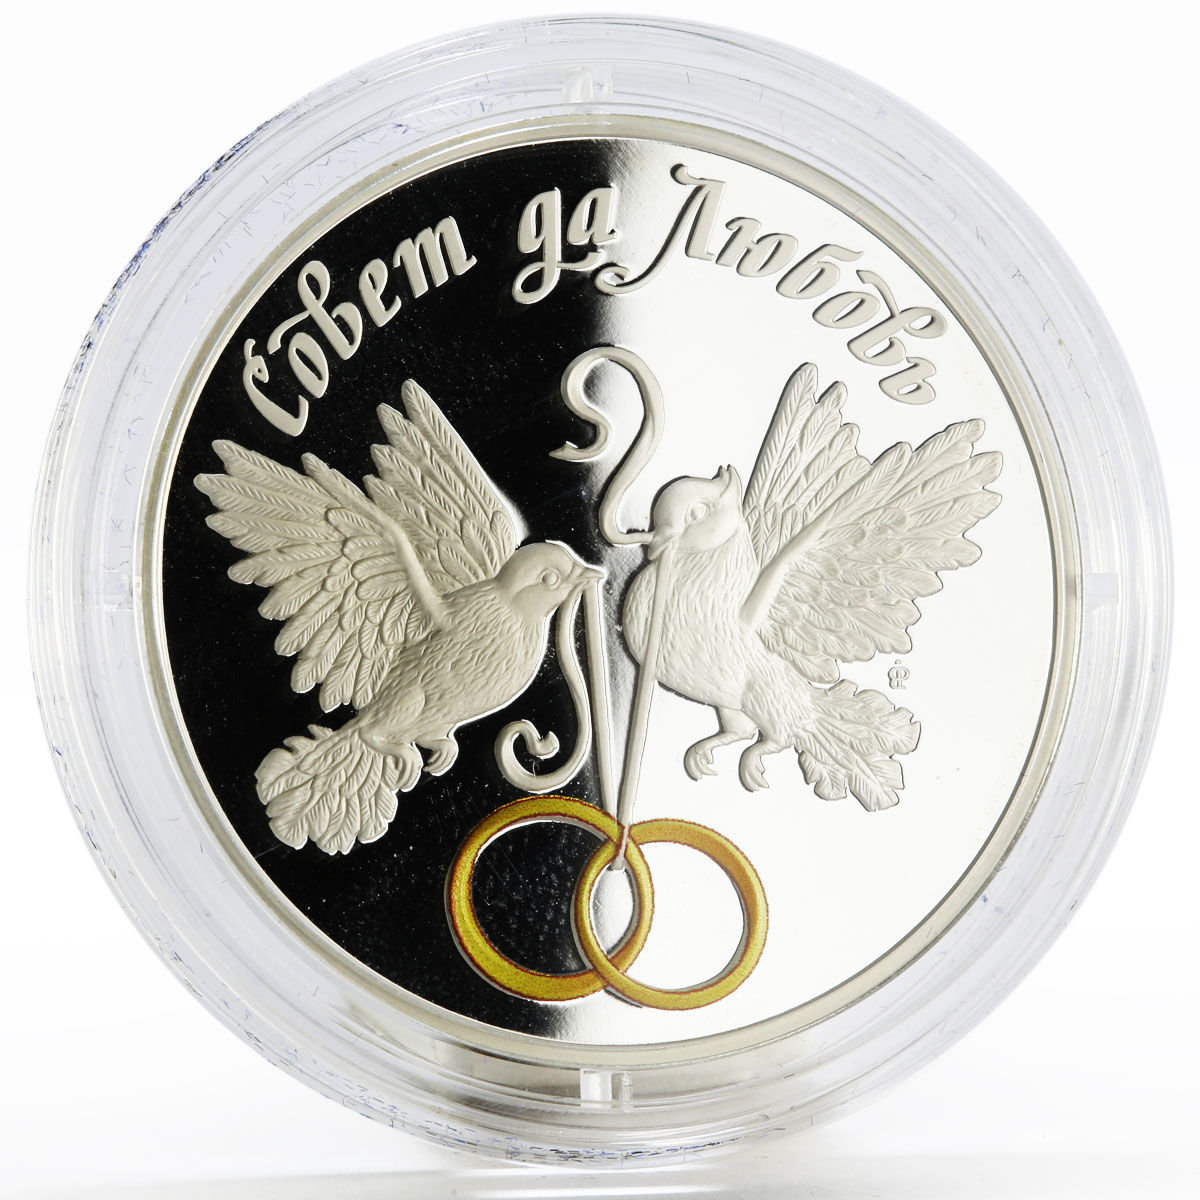 Transnistria 20 rubles Holidays and Advice and Love Two Doves silver coin 2017